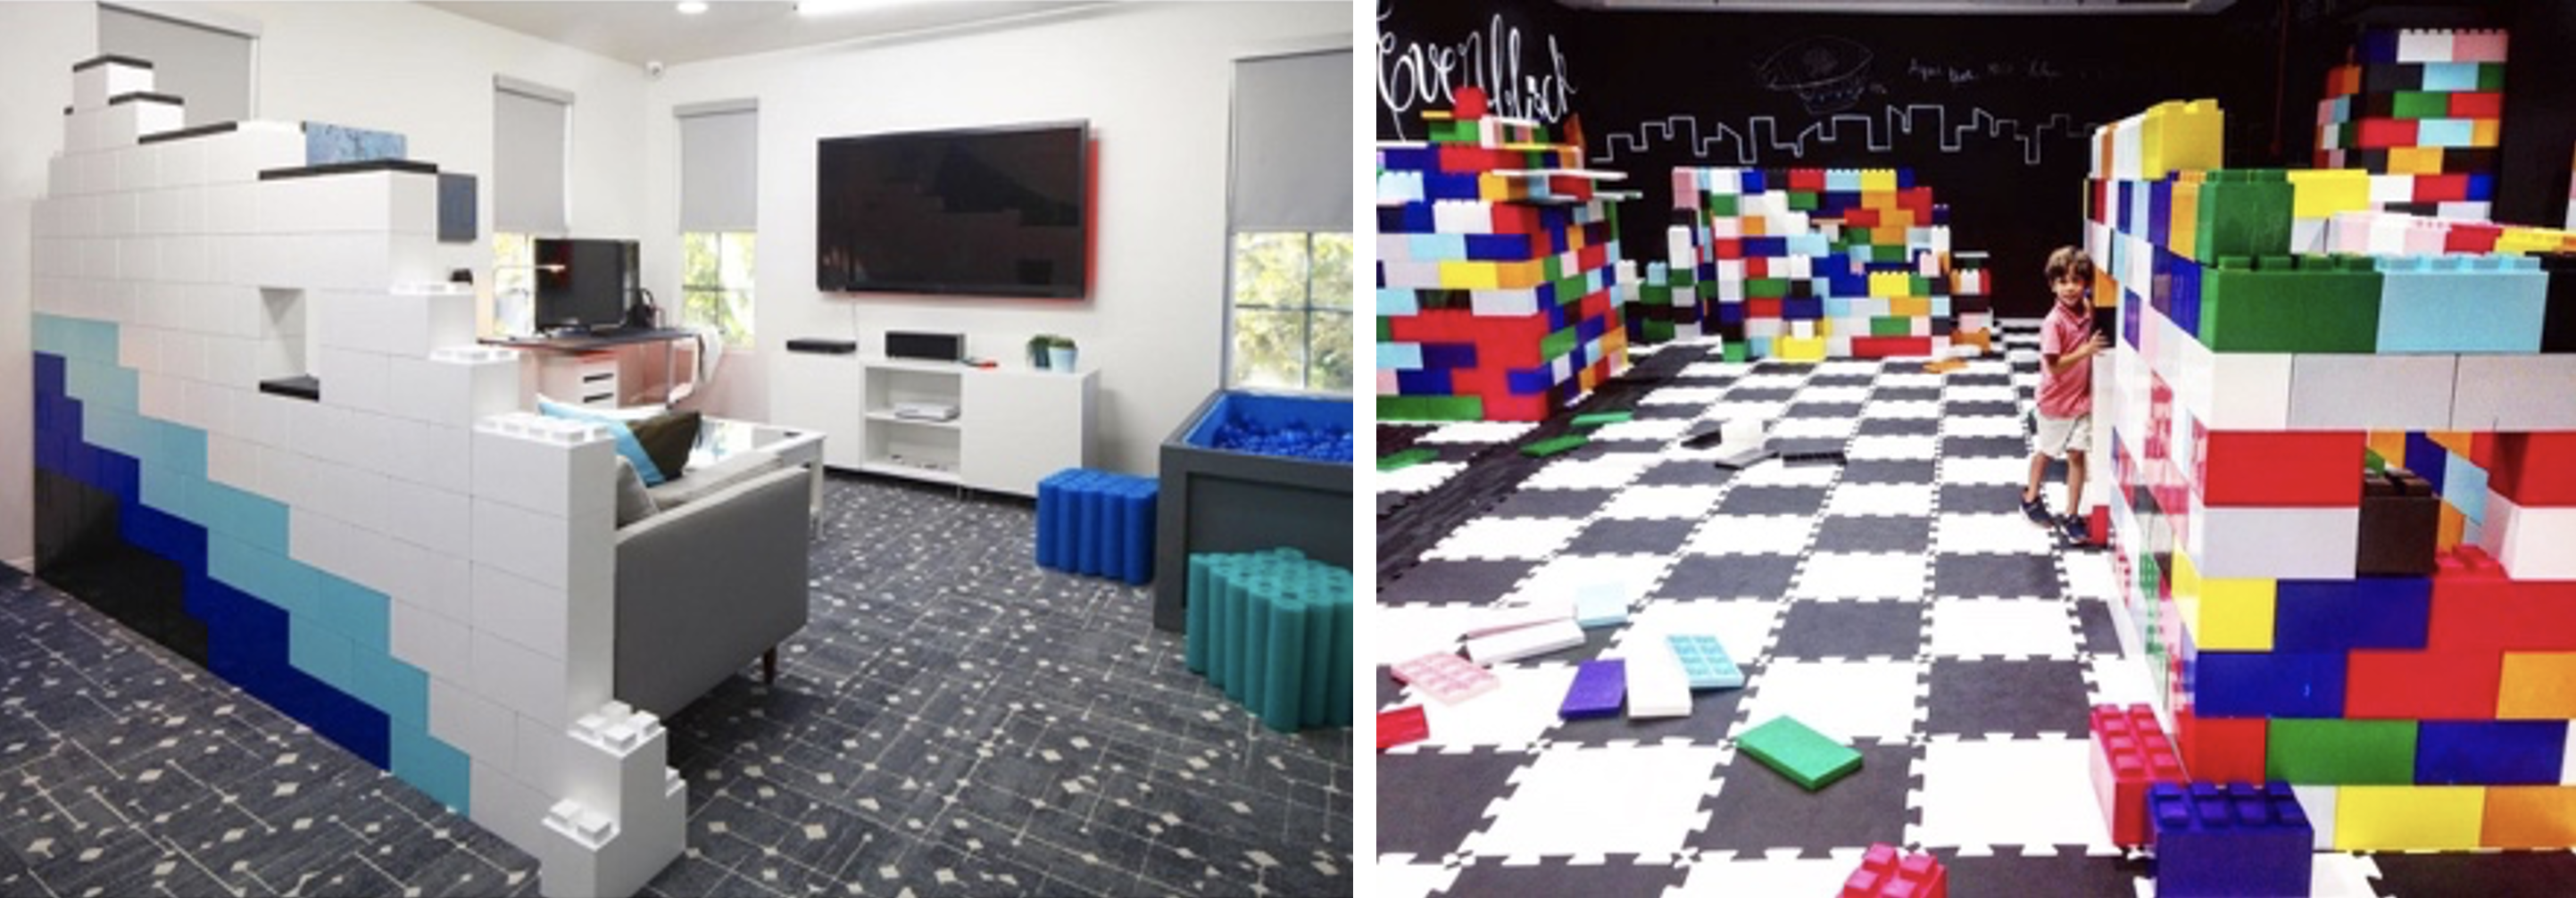 Spice up your office, playroom or hang out area with EverBlocks!